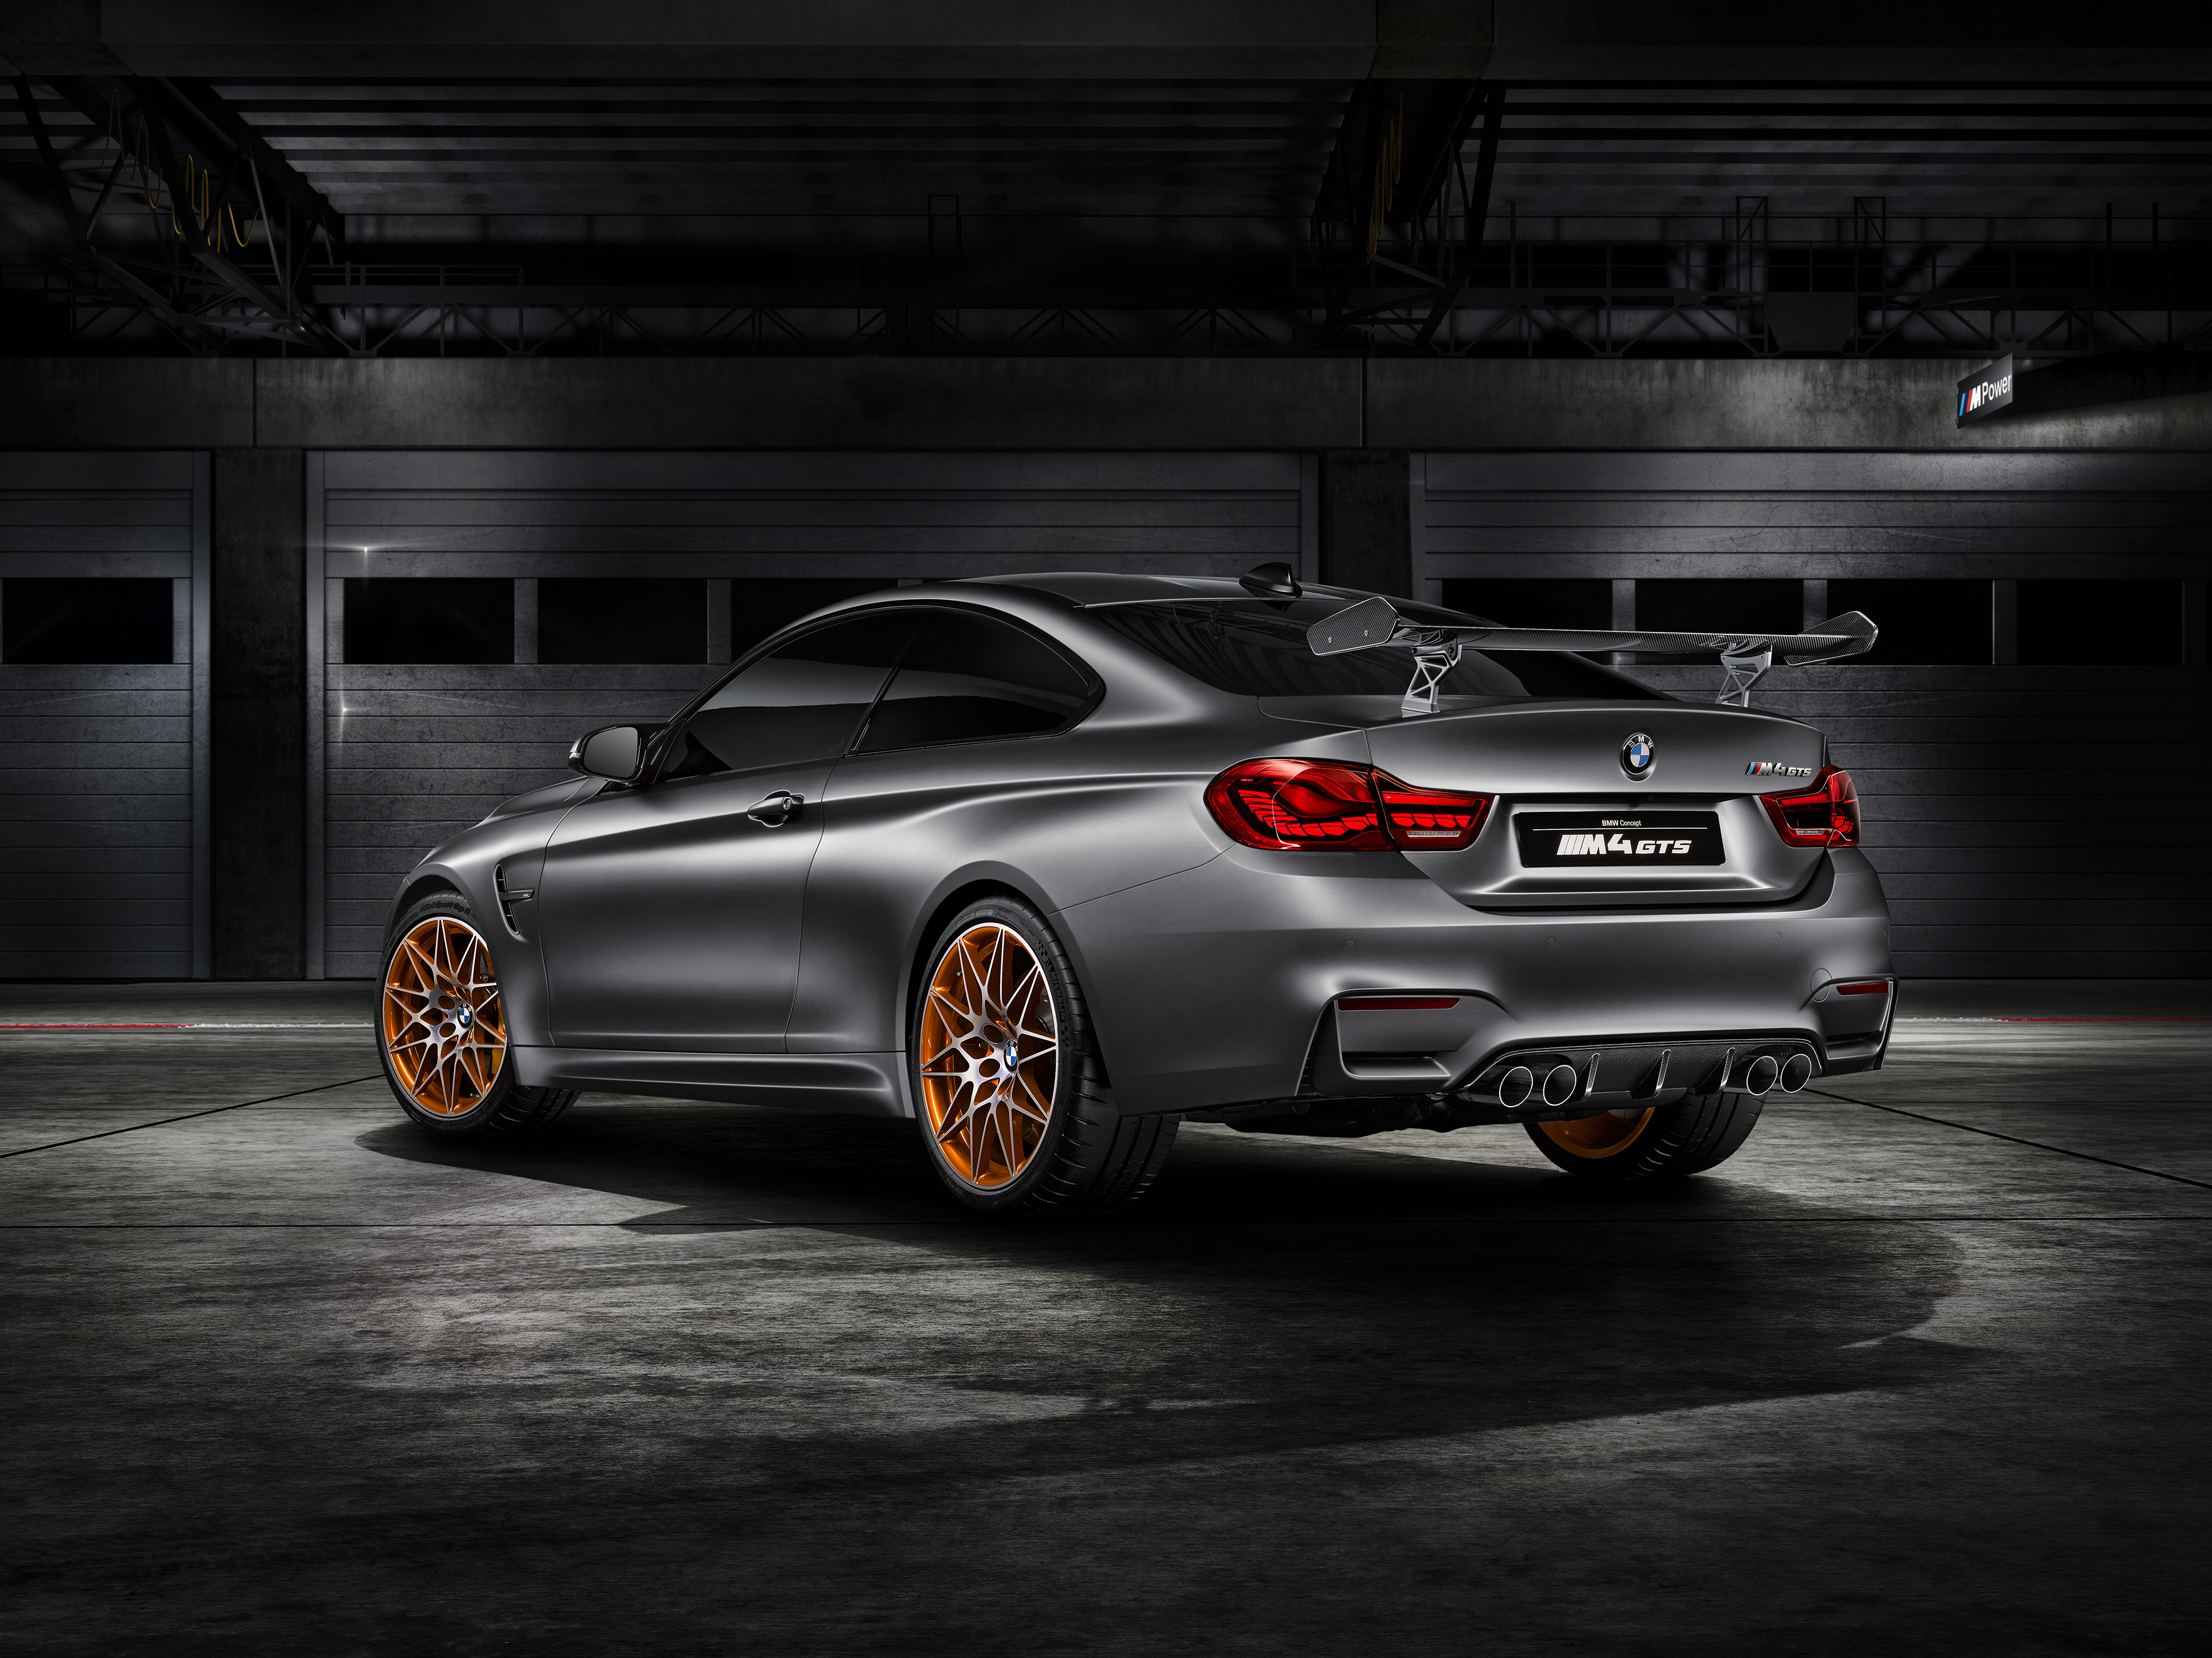 79374 Screensavers and Wallpapers Rear View for phone. Download bmw, cars, back view, rear view, silver, silvery, m4, gts, f82 pictures for free